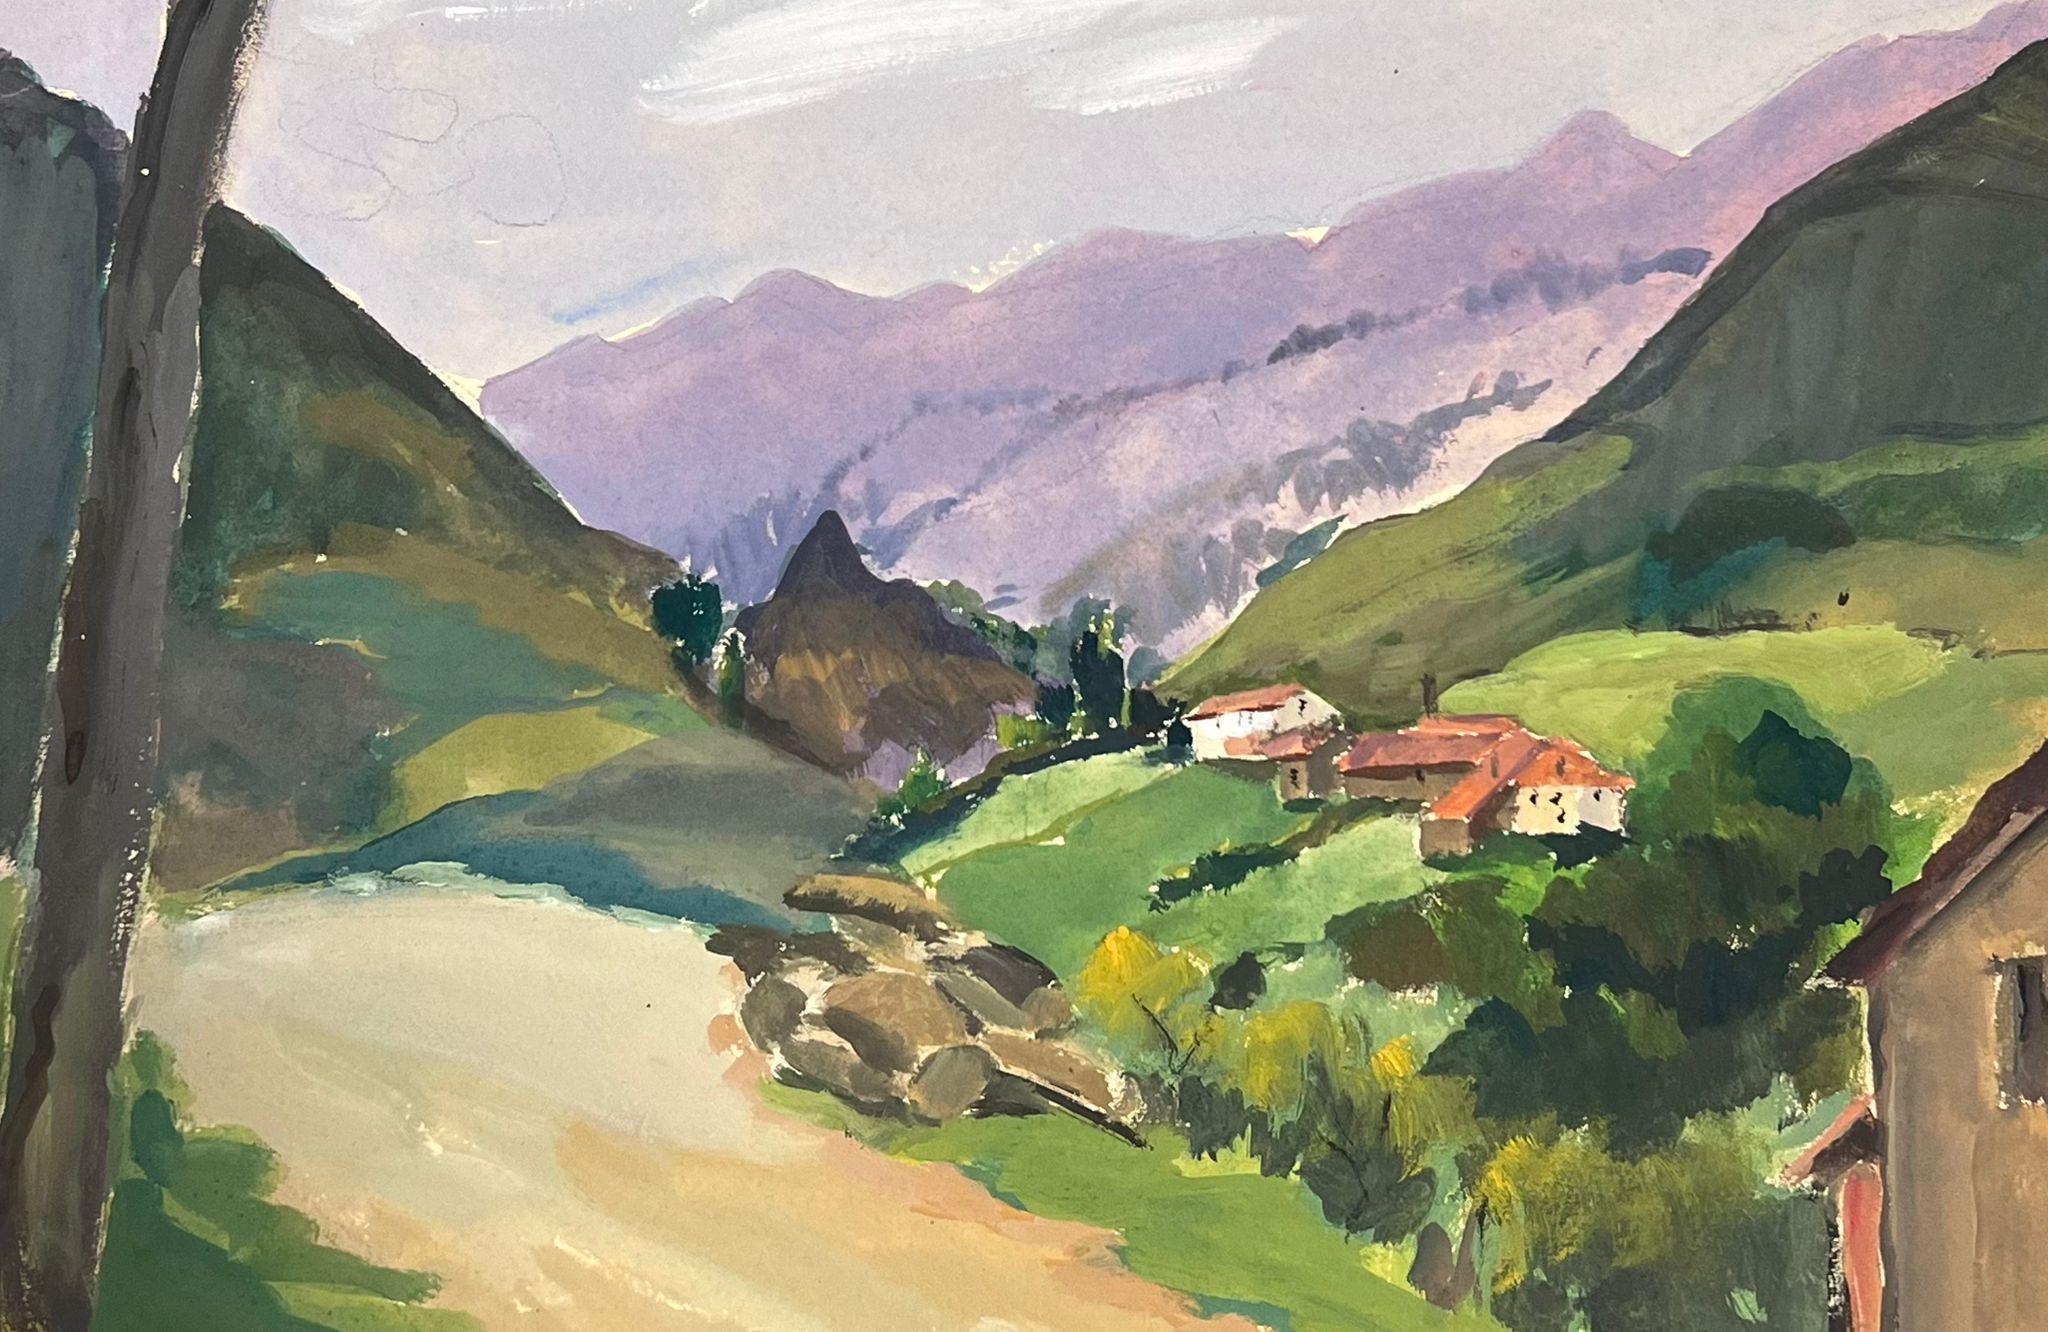 Country Track
by Louise Alix, French 1950's Impressionist 
gouache on artist paper, unframed
painting: 9 x 12 inches
provenance: from a large private collection of this artists work in Northern France
condition: original, good and sound condition